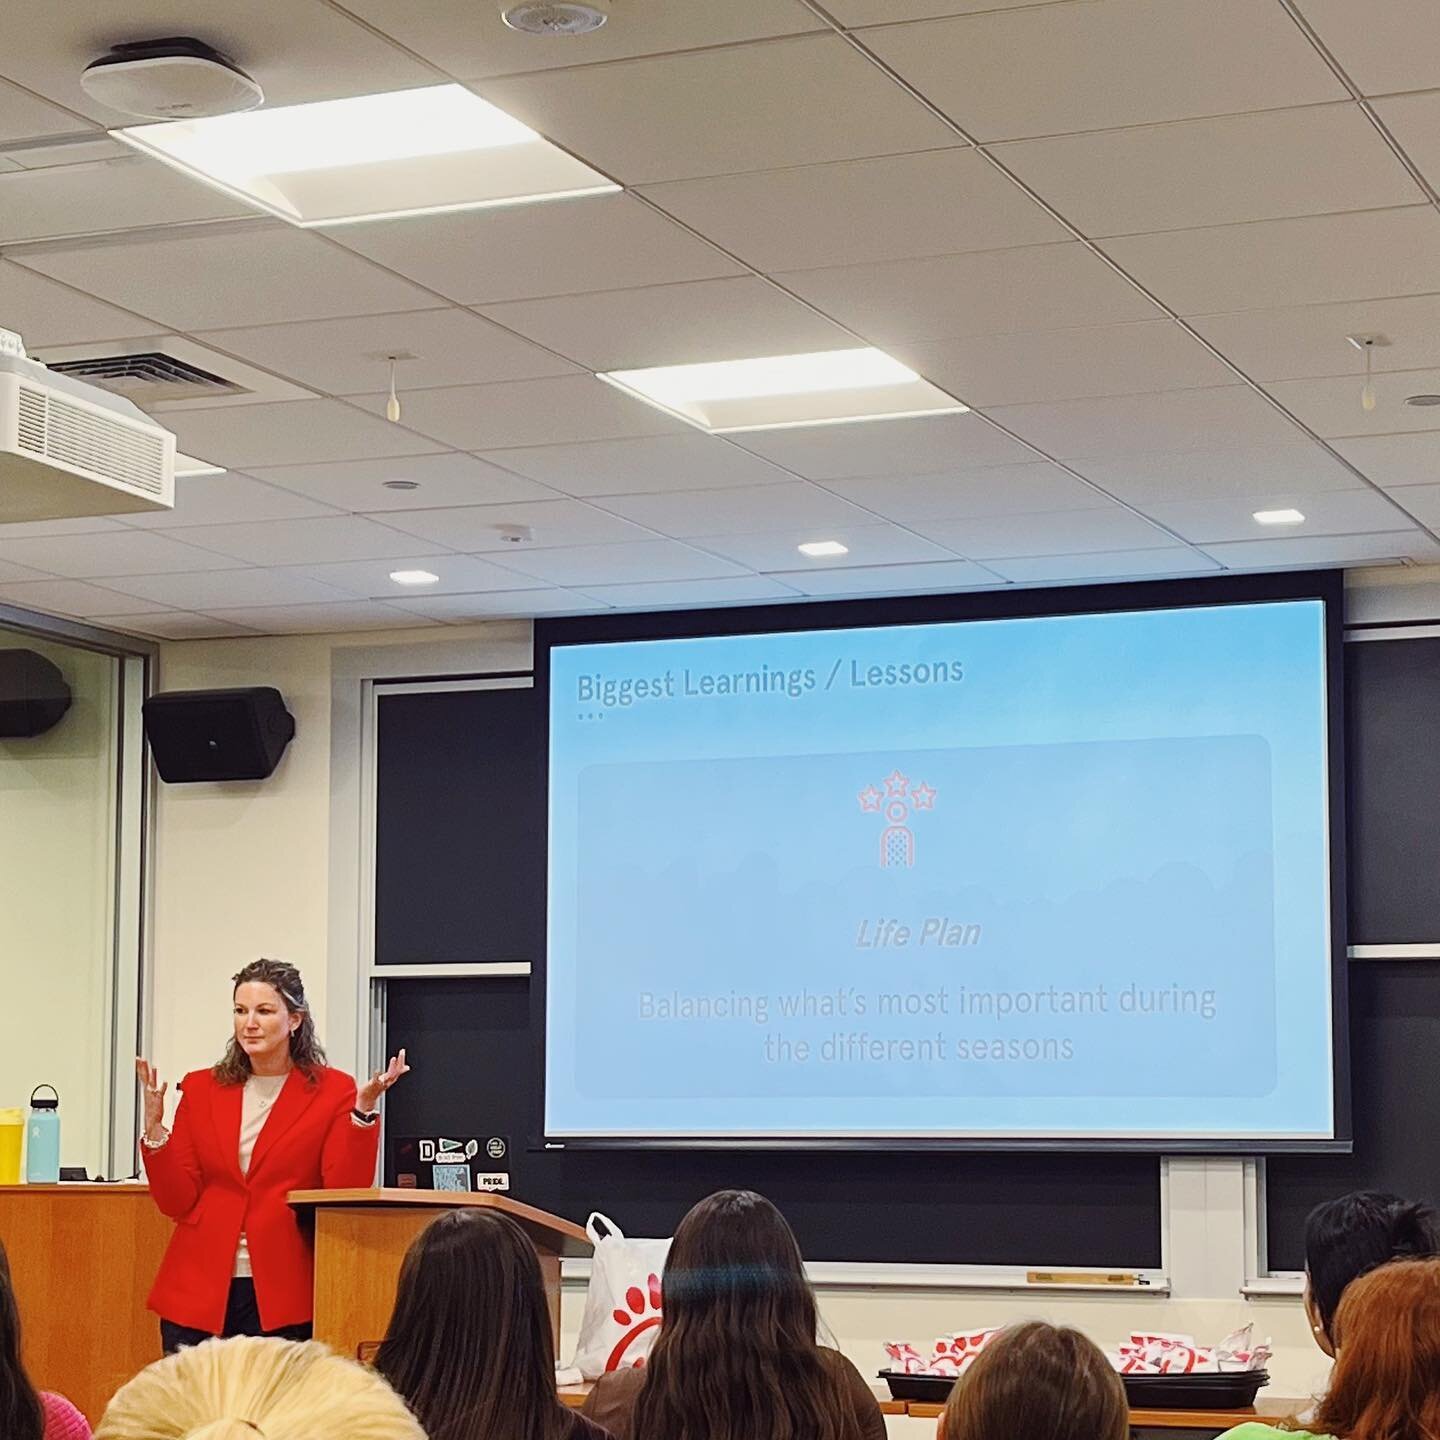 @bcwib x @chickfila &hellip;does it get any better???

Thank you so much to Amy Ohde for another amazing discussion &amp; dinner!!
&hellip;
&ldquo;The biggest lesson of a life plan is remembering to balance what&rsquo;s most important during life&rsq